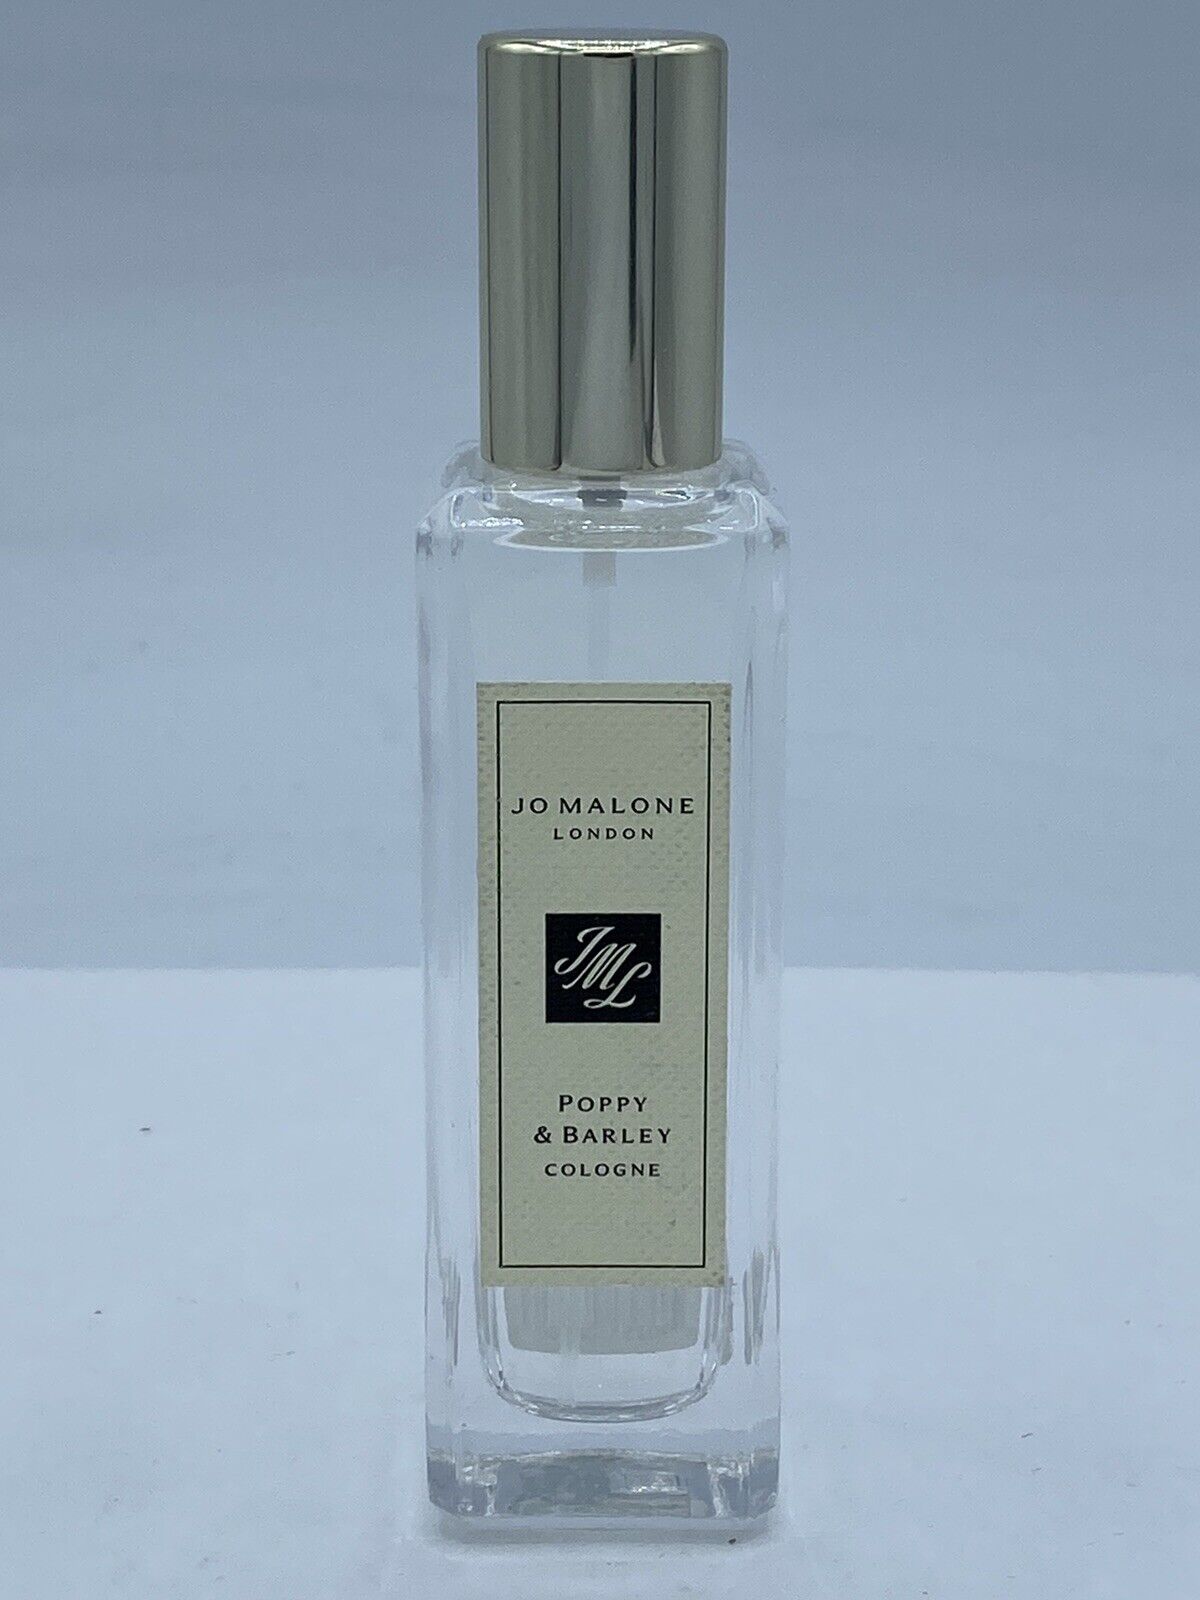 Jo Malone London Poppy & Barley Cologne 1.0 oz 30 Ml New Without Box *Authentic*